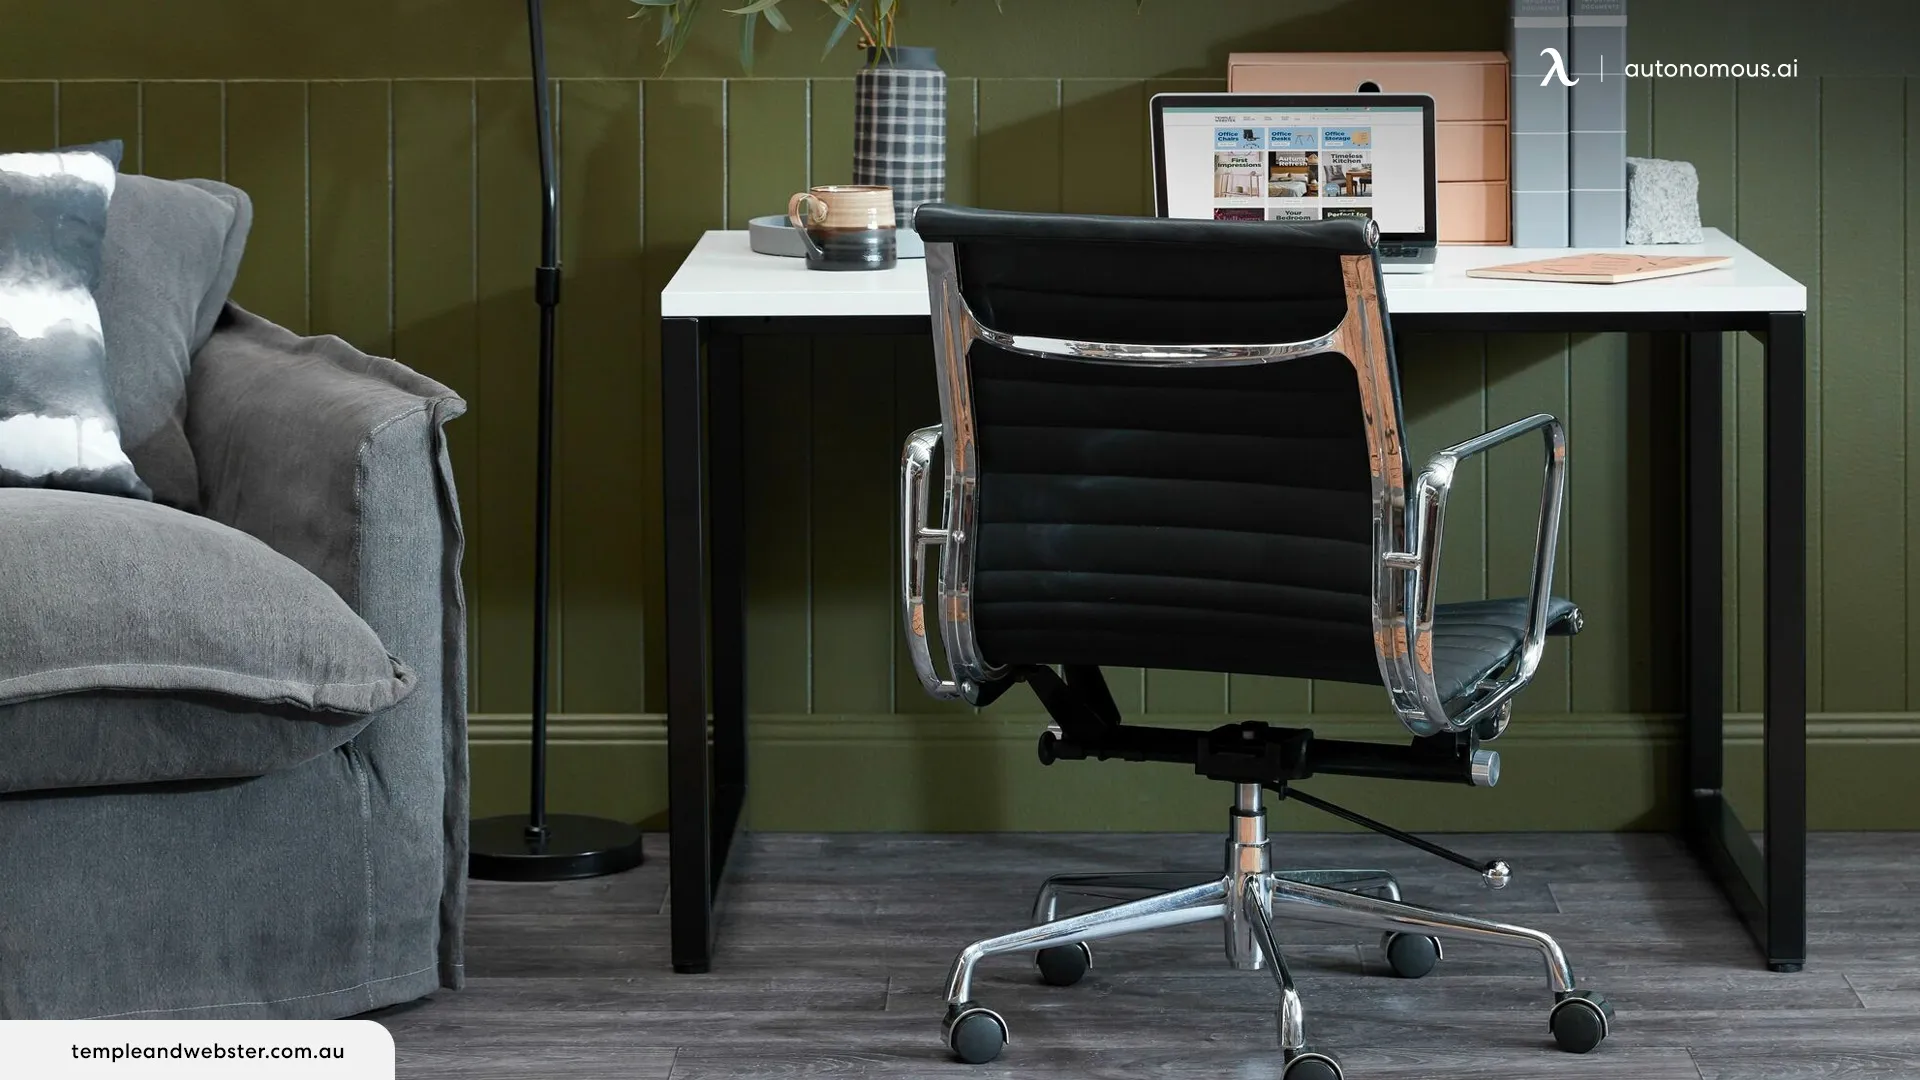 Choosing a Black Desk Chair for Your Executive Office: Styling Tips and Top Picks